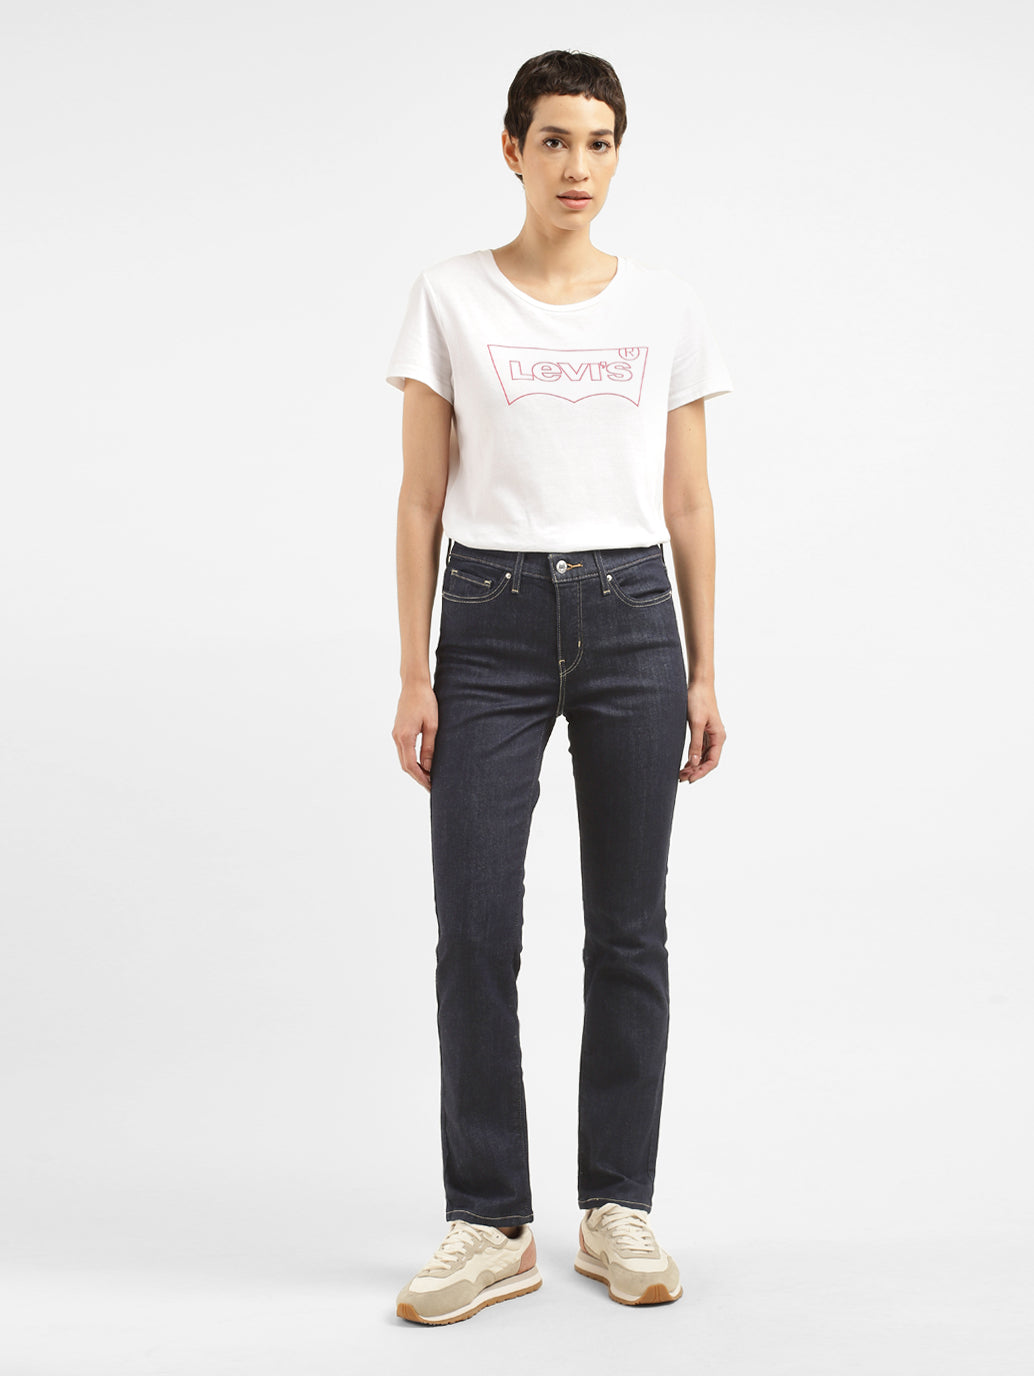 Buy 312 Shaping Slim Jeans for Women Online – Levis India Store